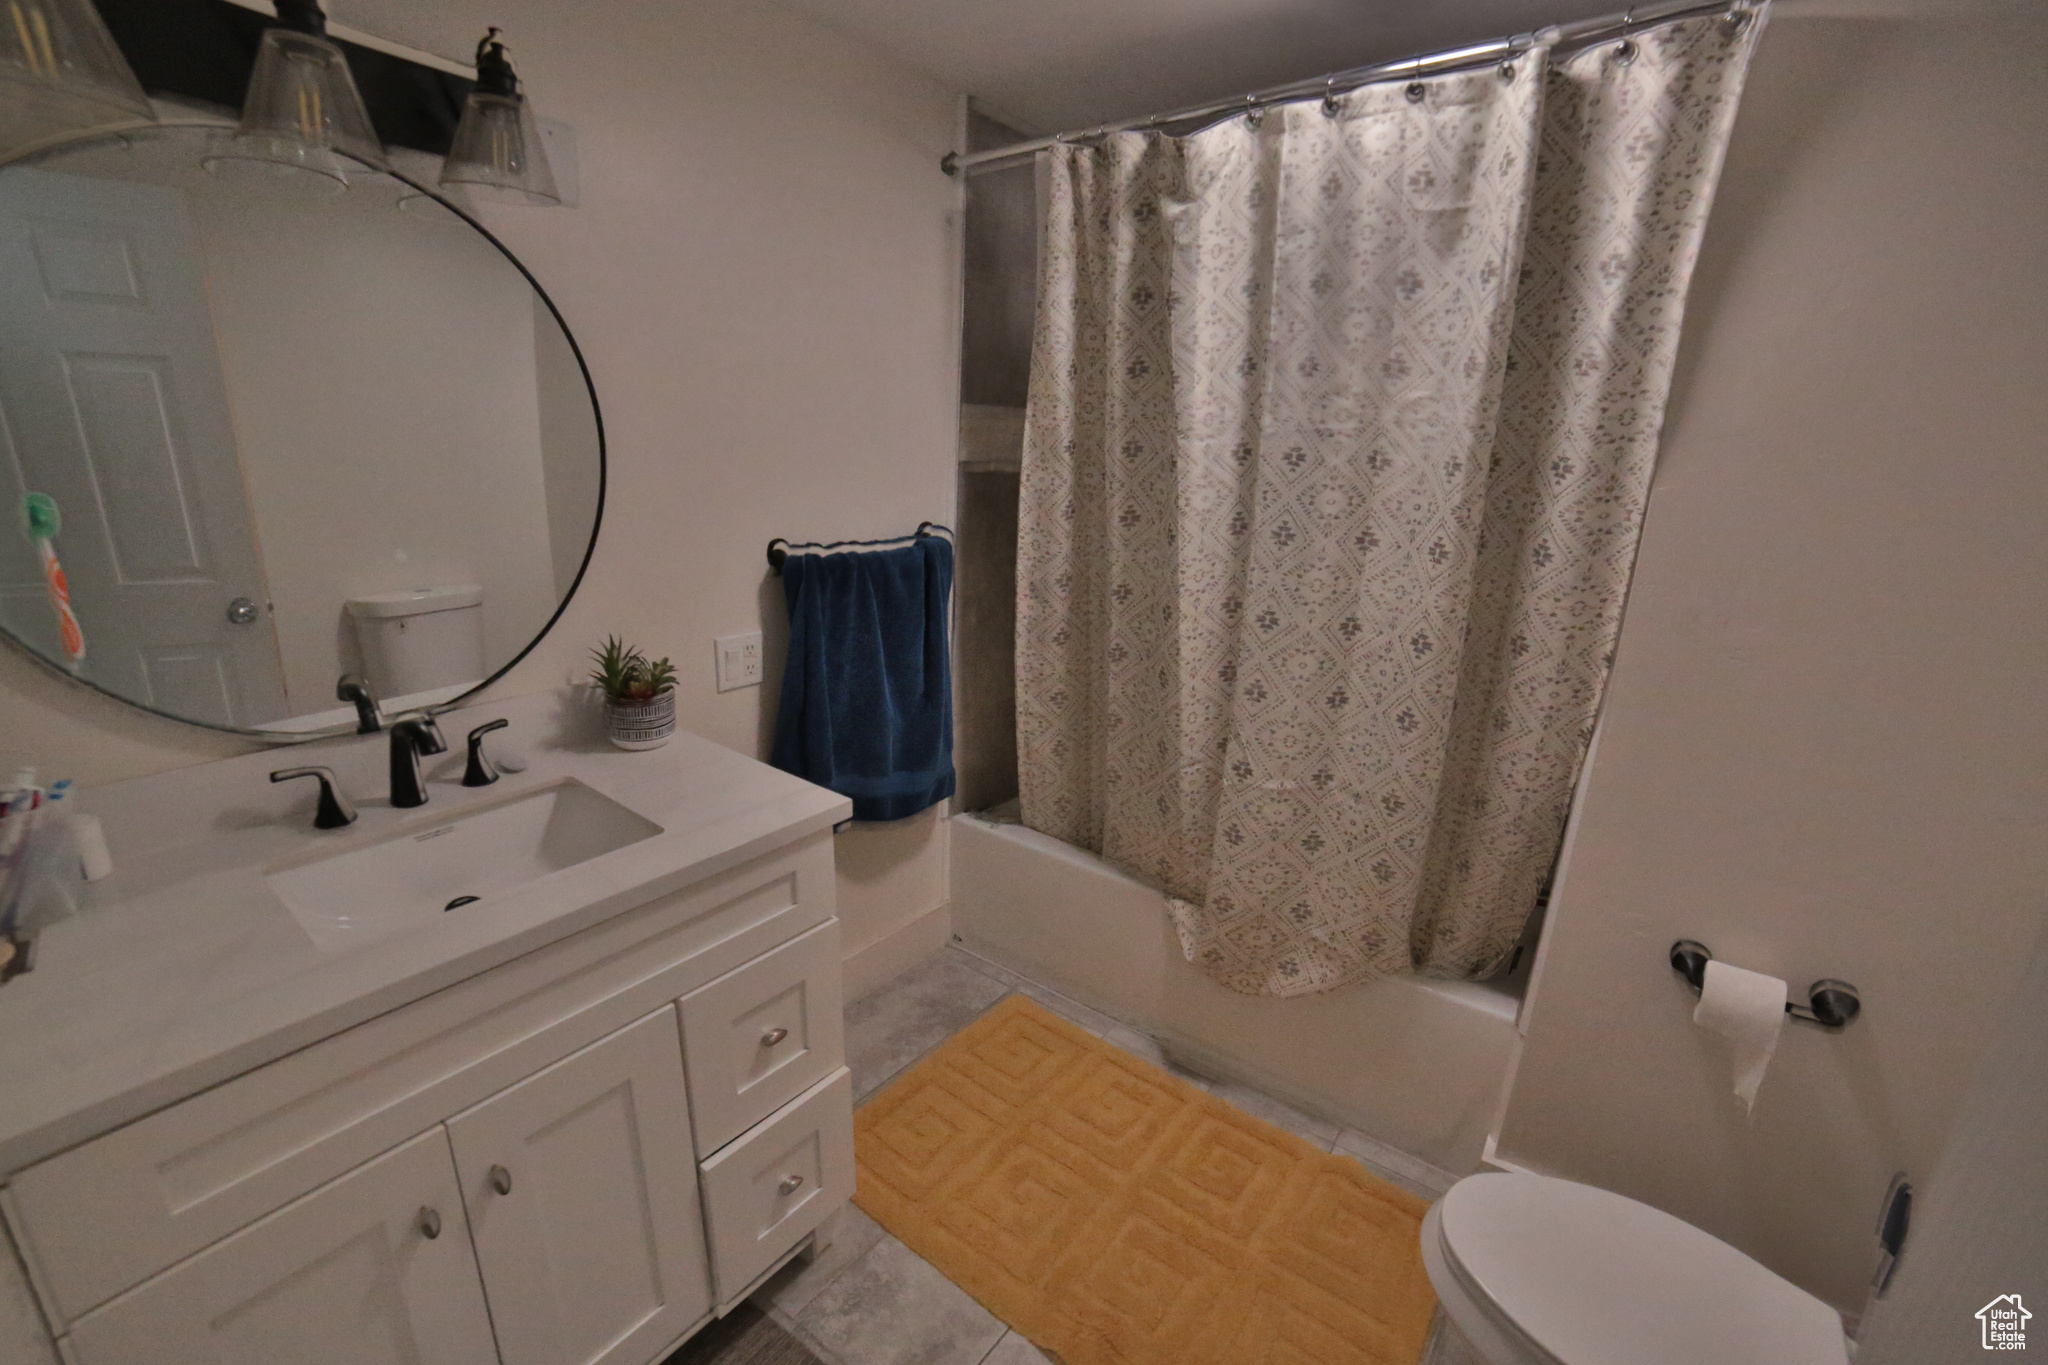 Full bathroom with toilet, tile flooring, shower / tub combo with curtain, and vanity